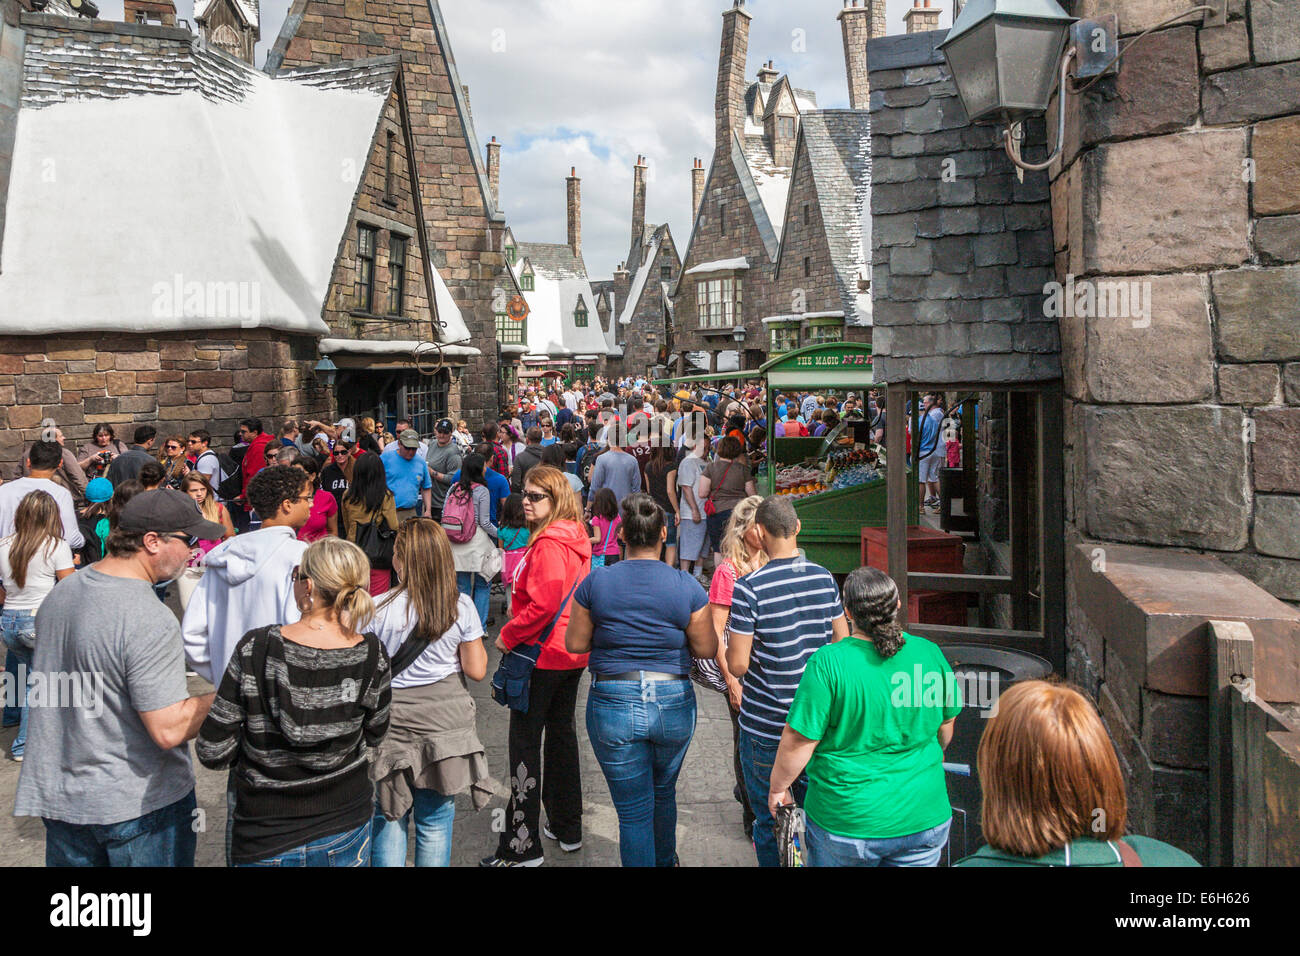 Theme park guests walk through Hogsmeade in The Wizarding World of Harry Potter at Universal Studios, Orlando, Florida Stock Photo